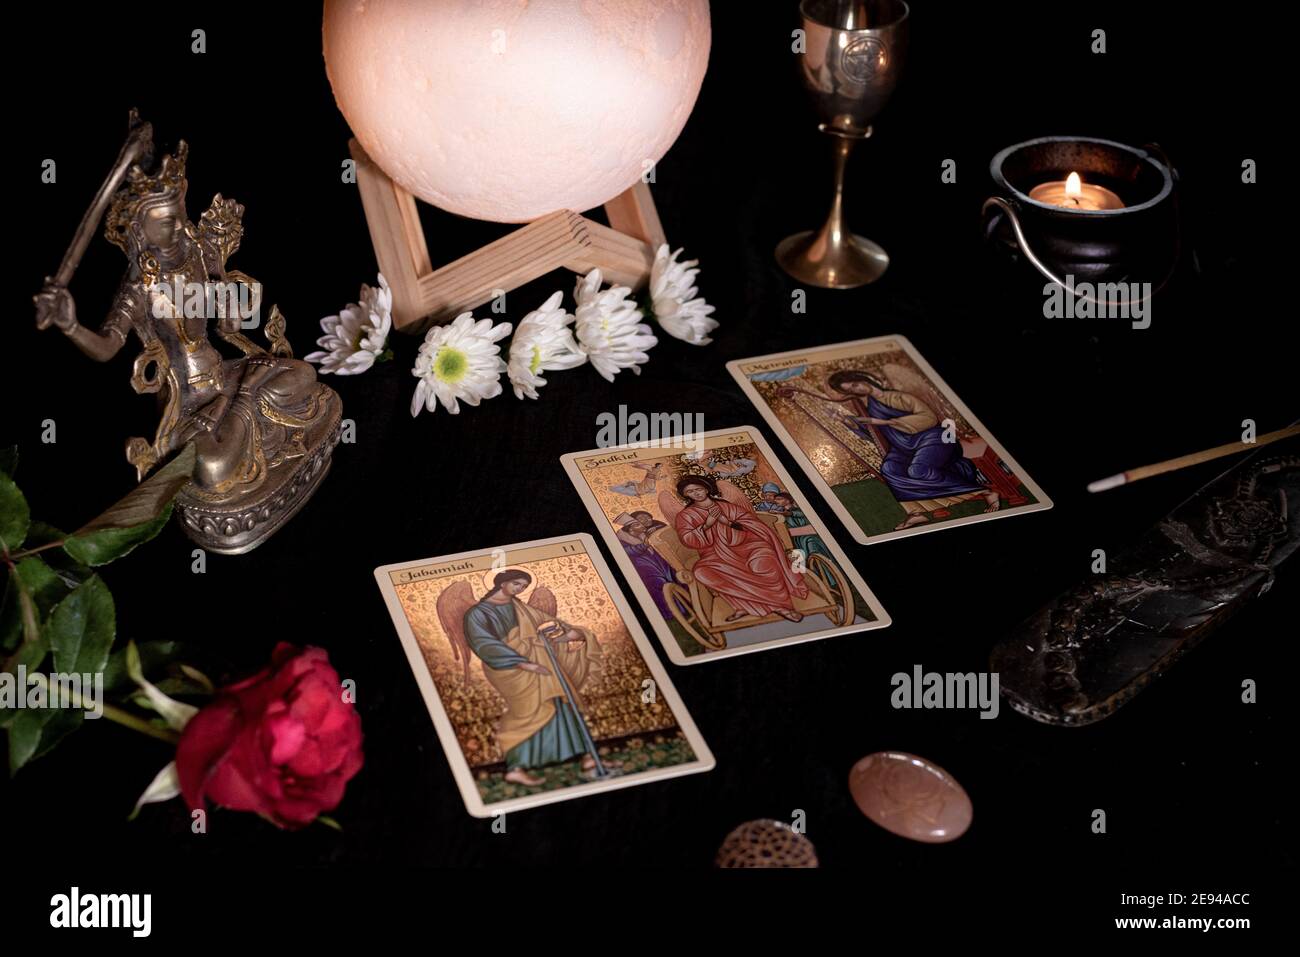 Tarot cards session 2, spreads, candles, crystals, minerals, statuettes and flowers Stock Photo